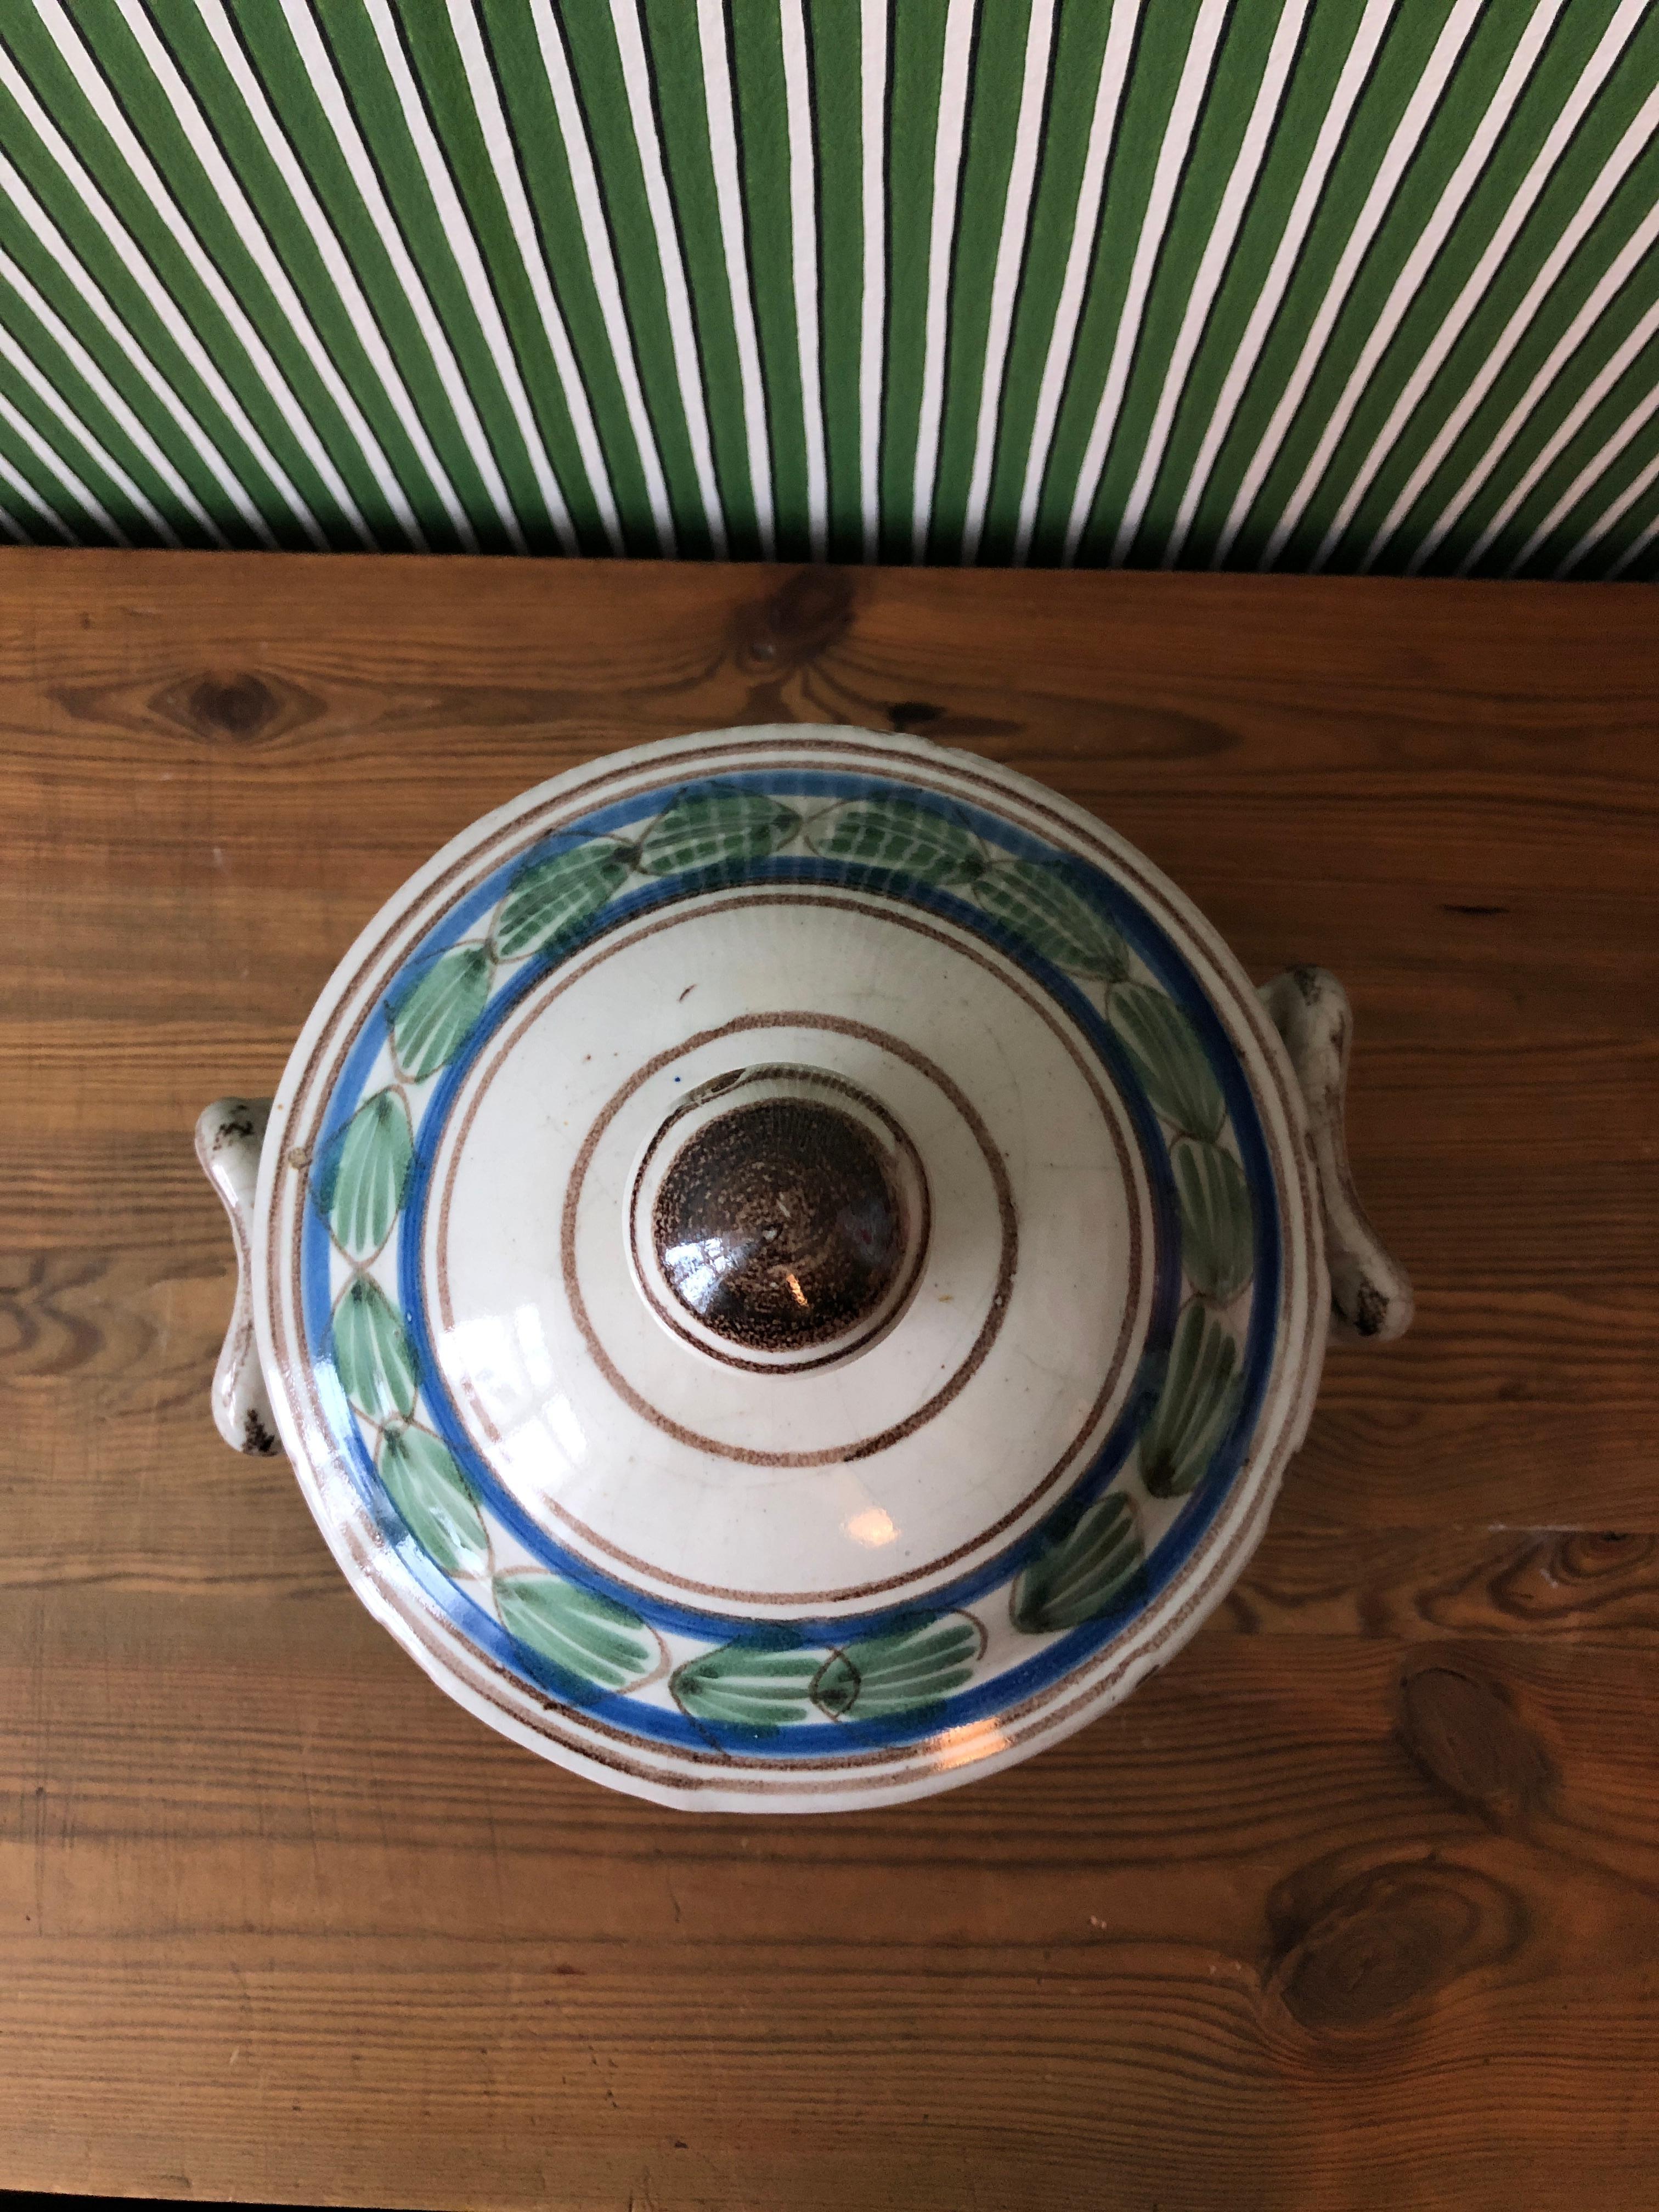 Vintage Vietri Ceramic Tureen with Blue and Green Glace, Italy Late 19th Century 1